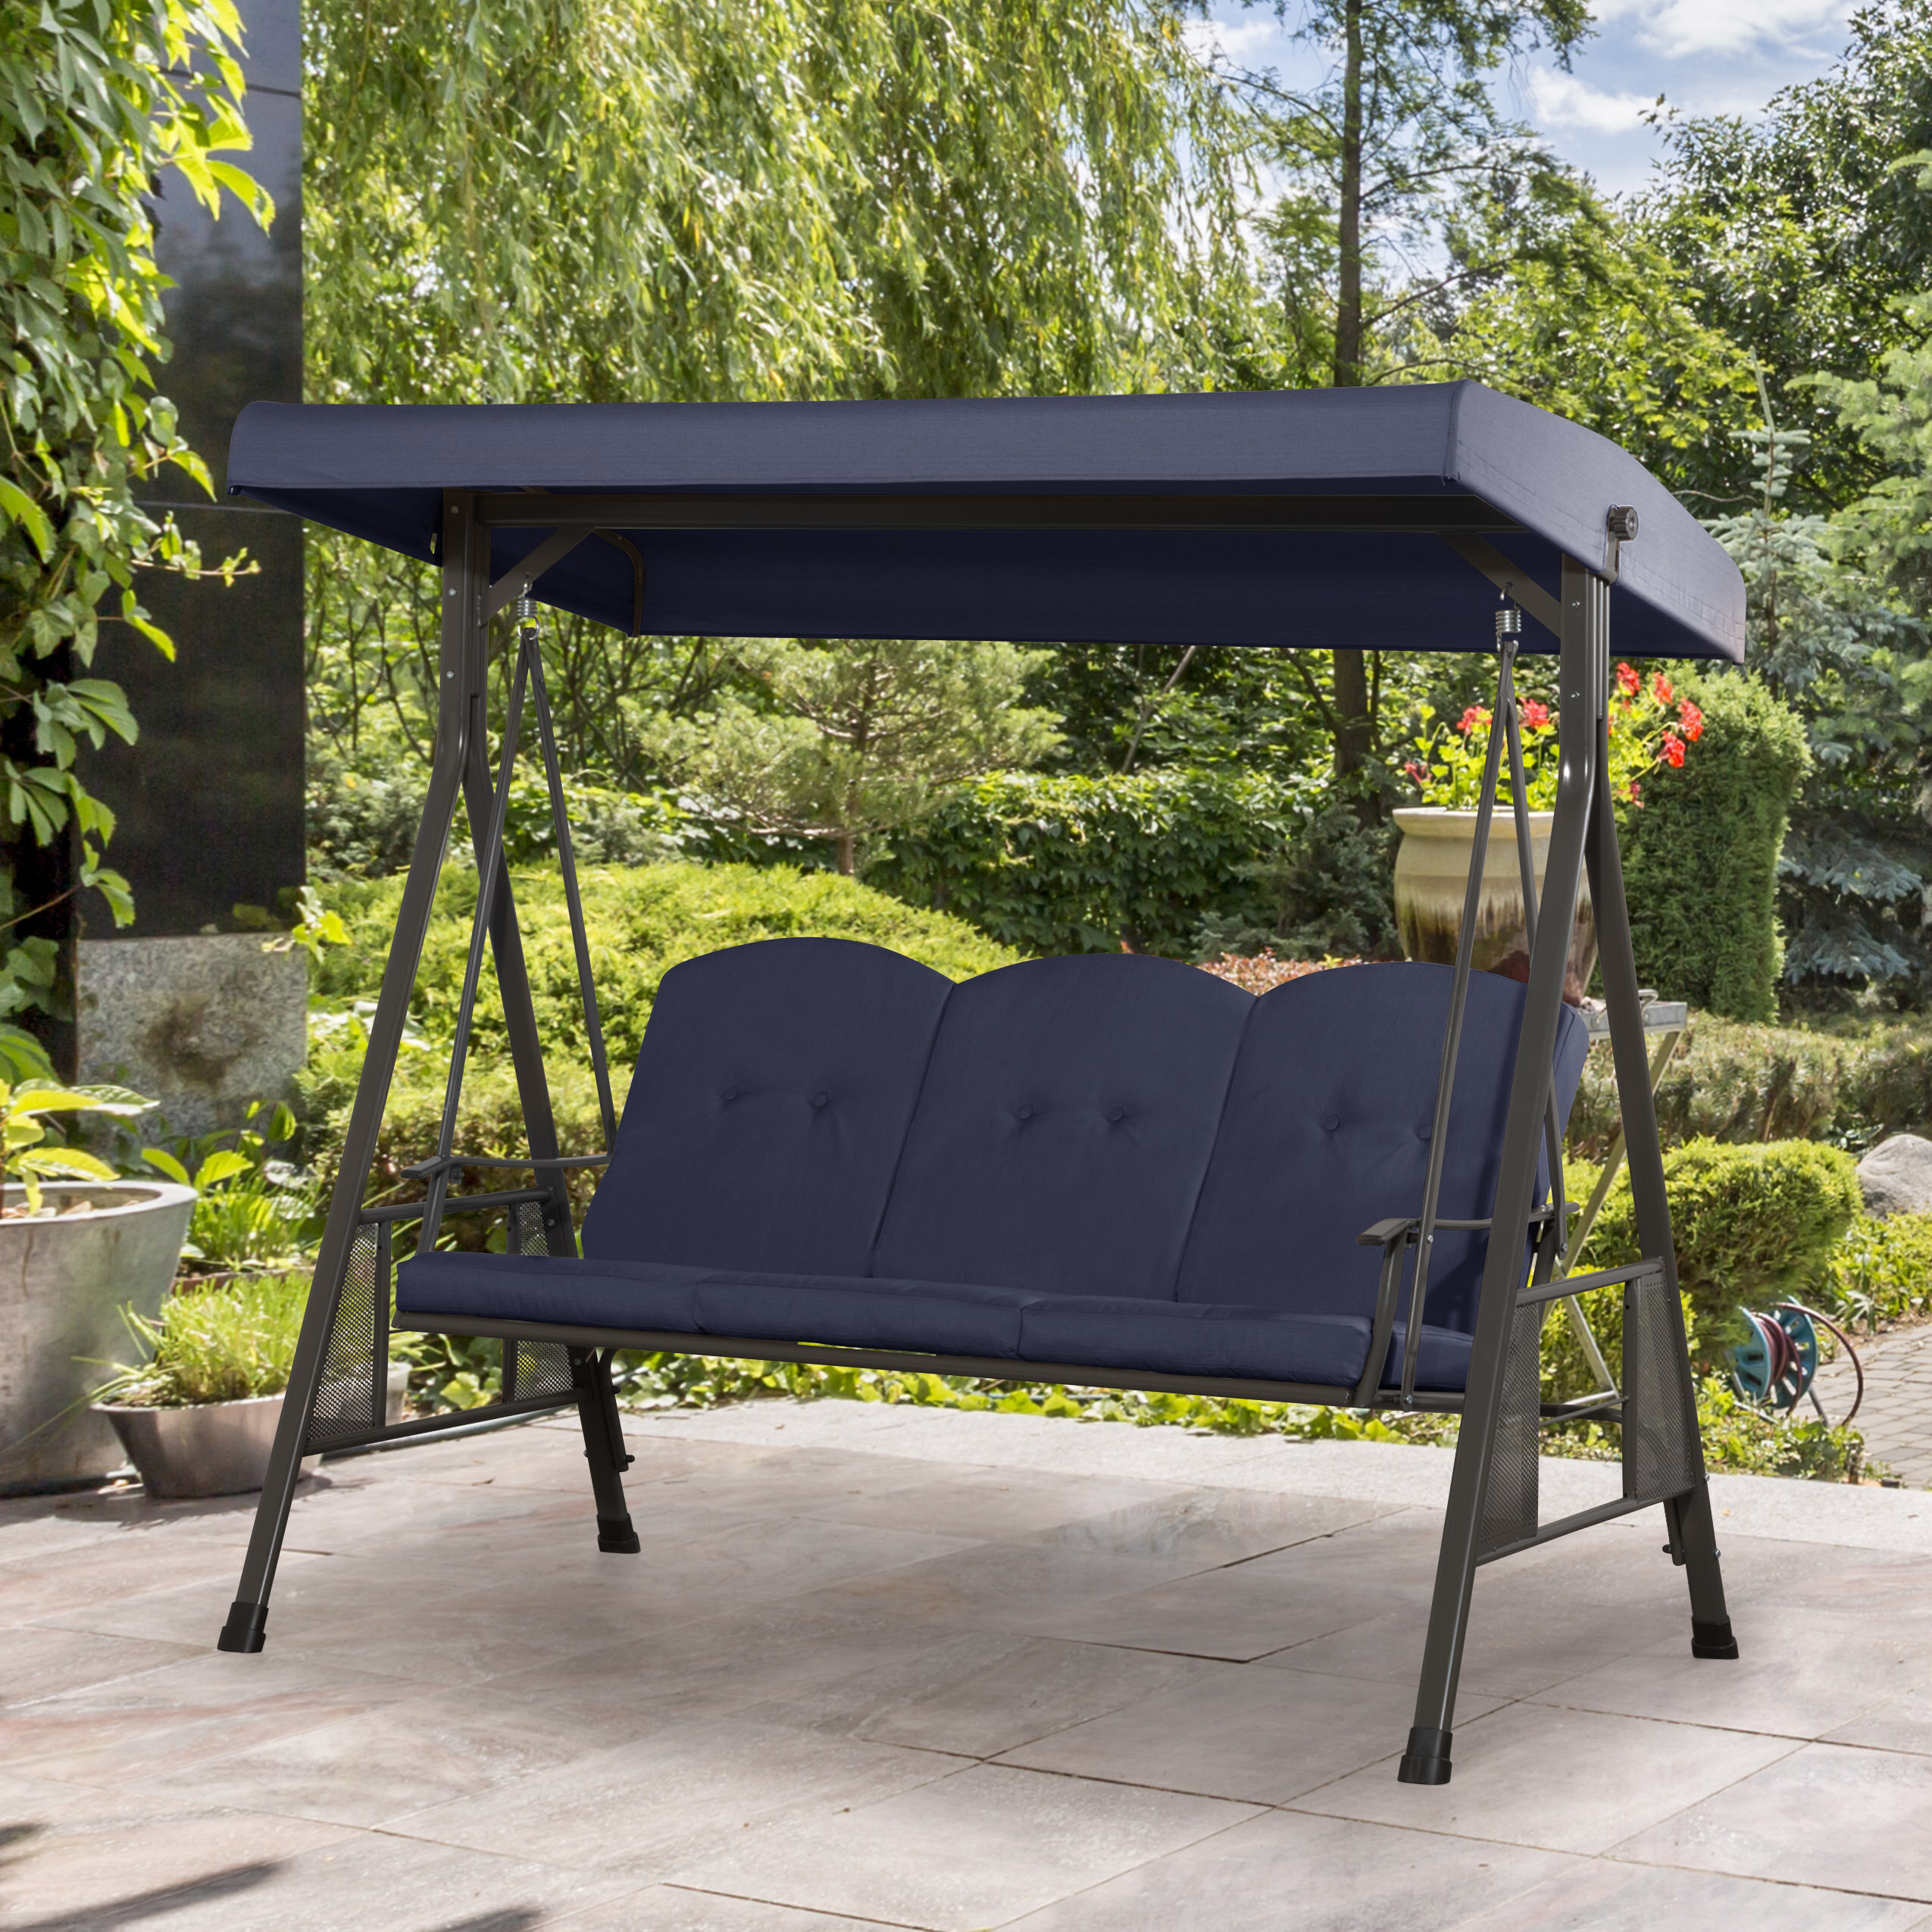 Patio Swing With Stand